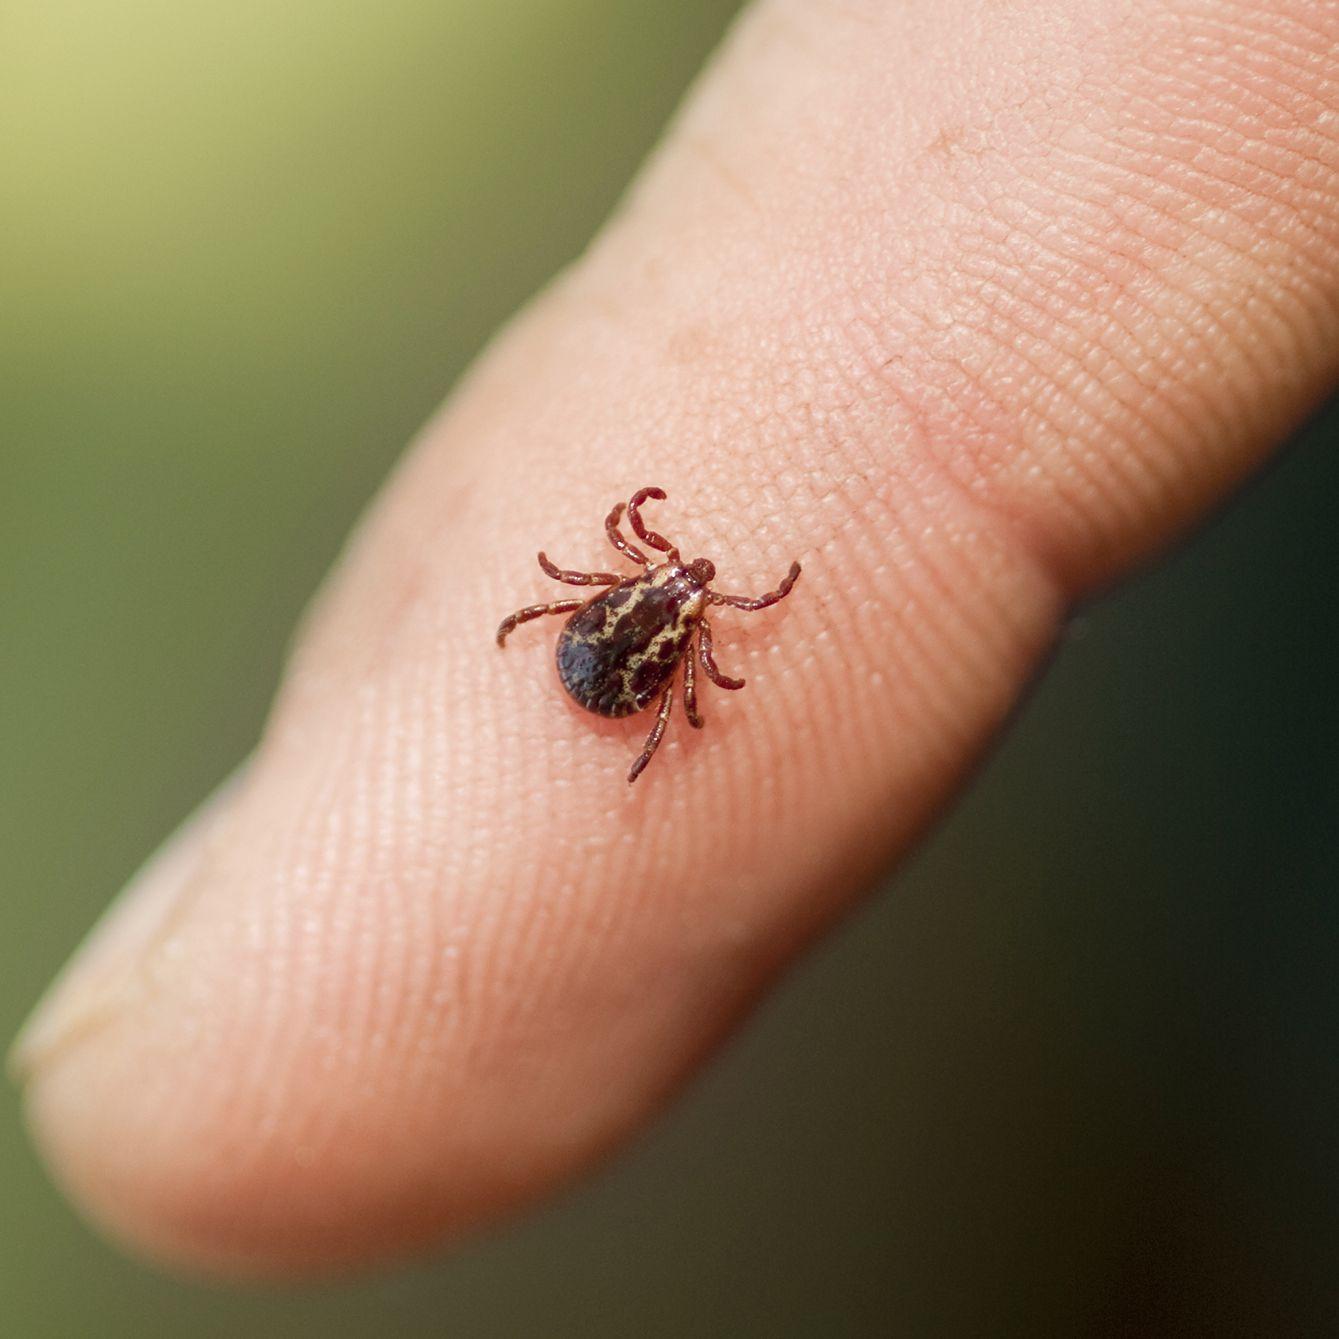 11 Tick-Borne Diseases You Need to Know About This Summer